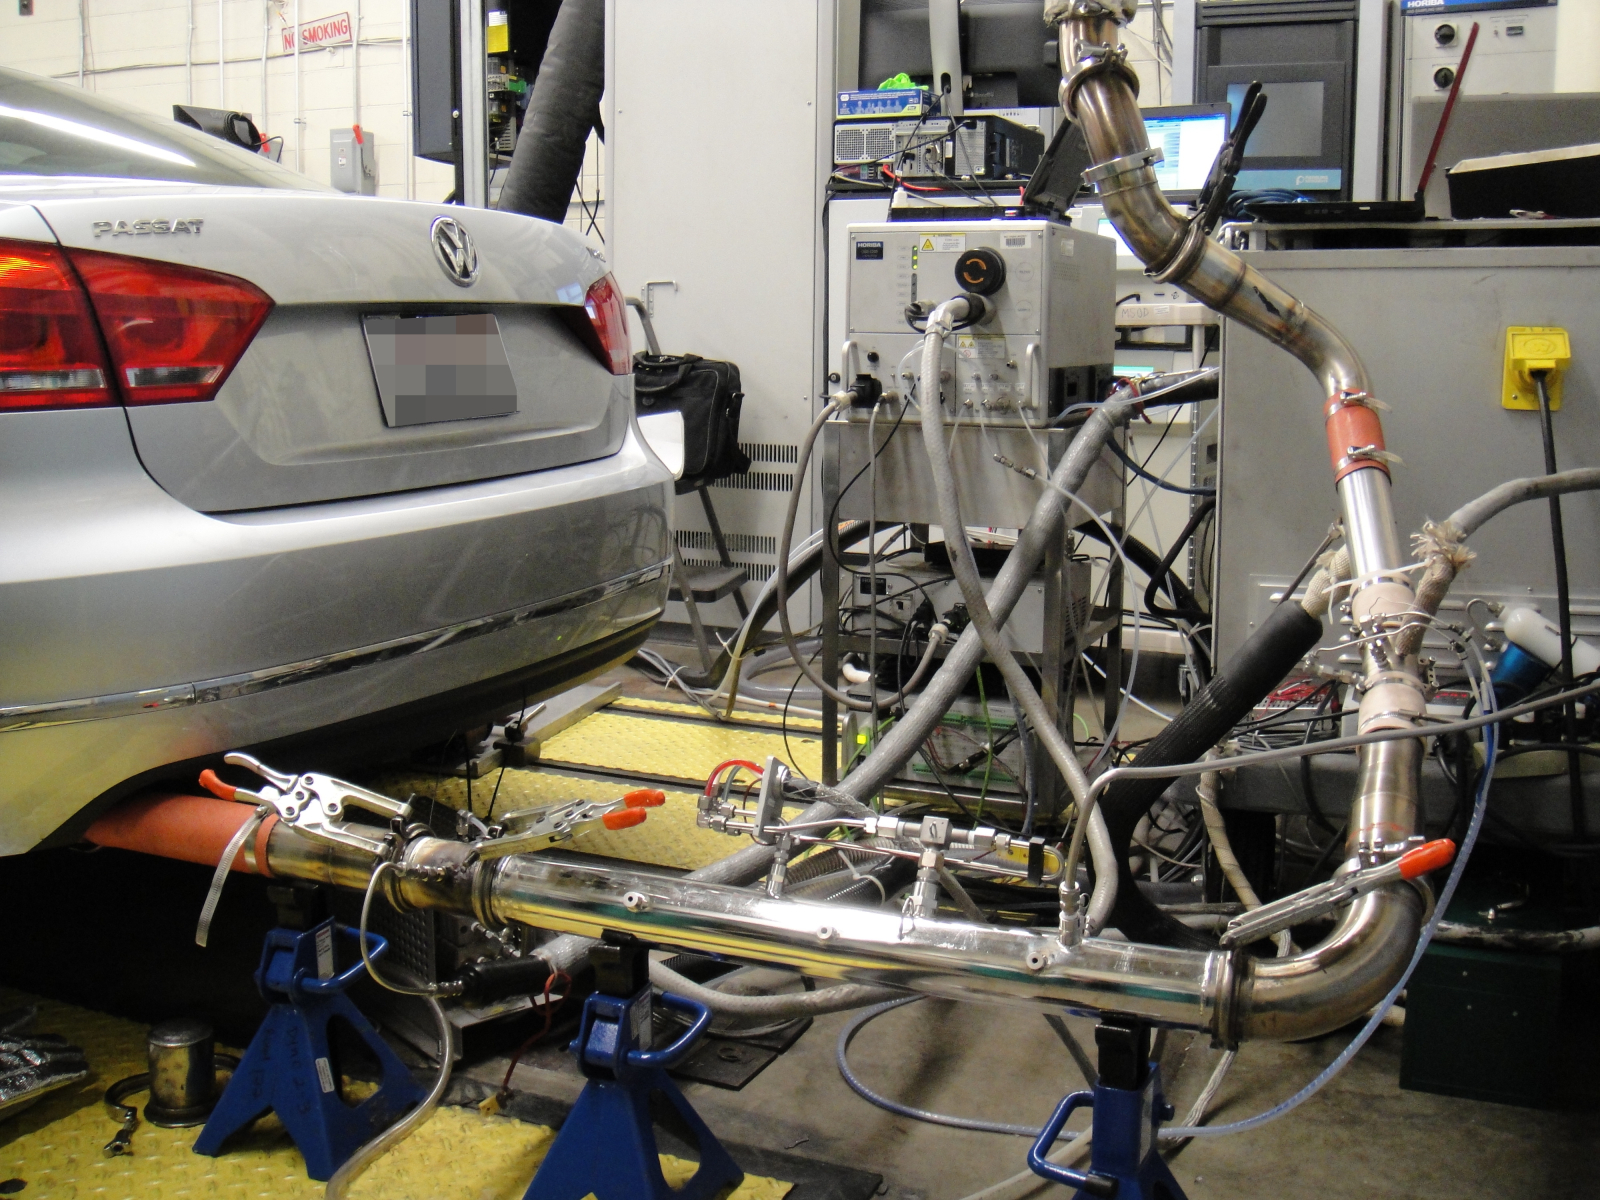 The Volkswagen Passat is hooked up to portable emissions testing equipment by Center for Alternative Fuels, Engines and Emissions for testing. Photo by Marc Besch